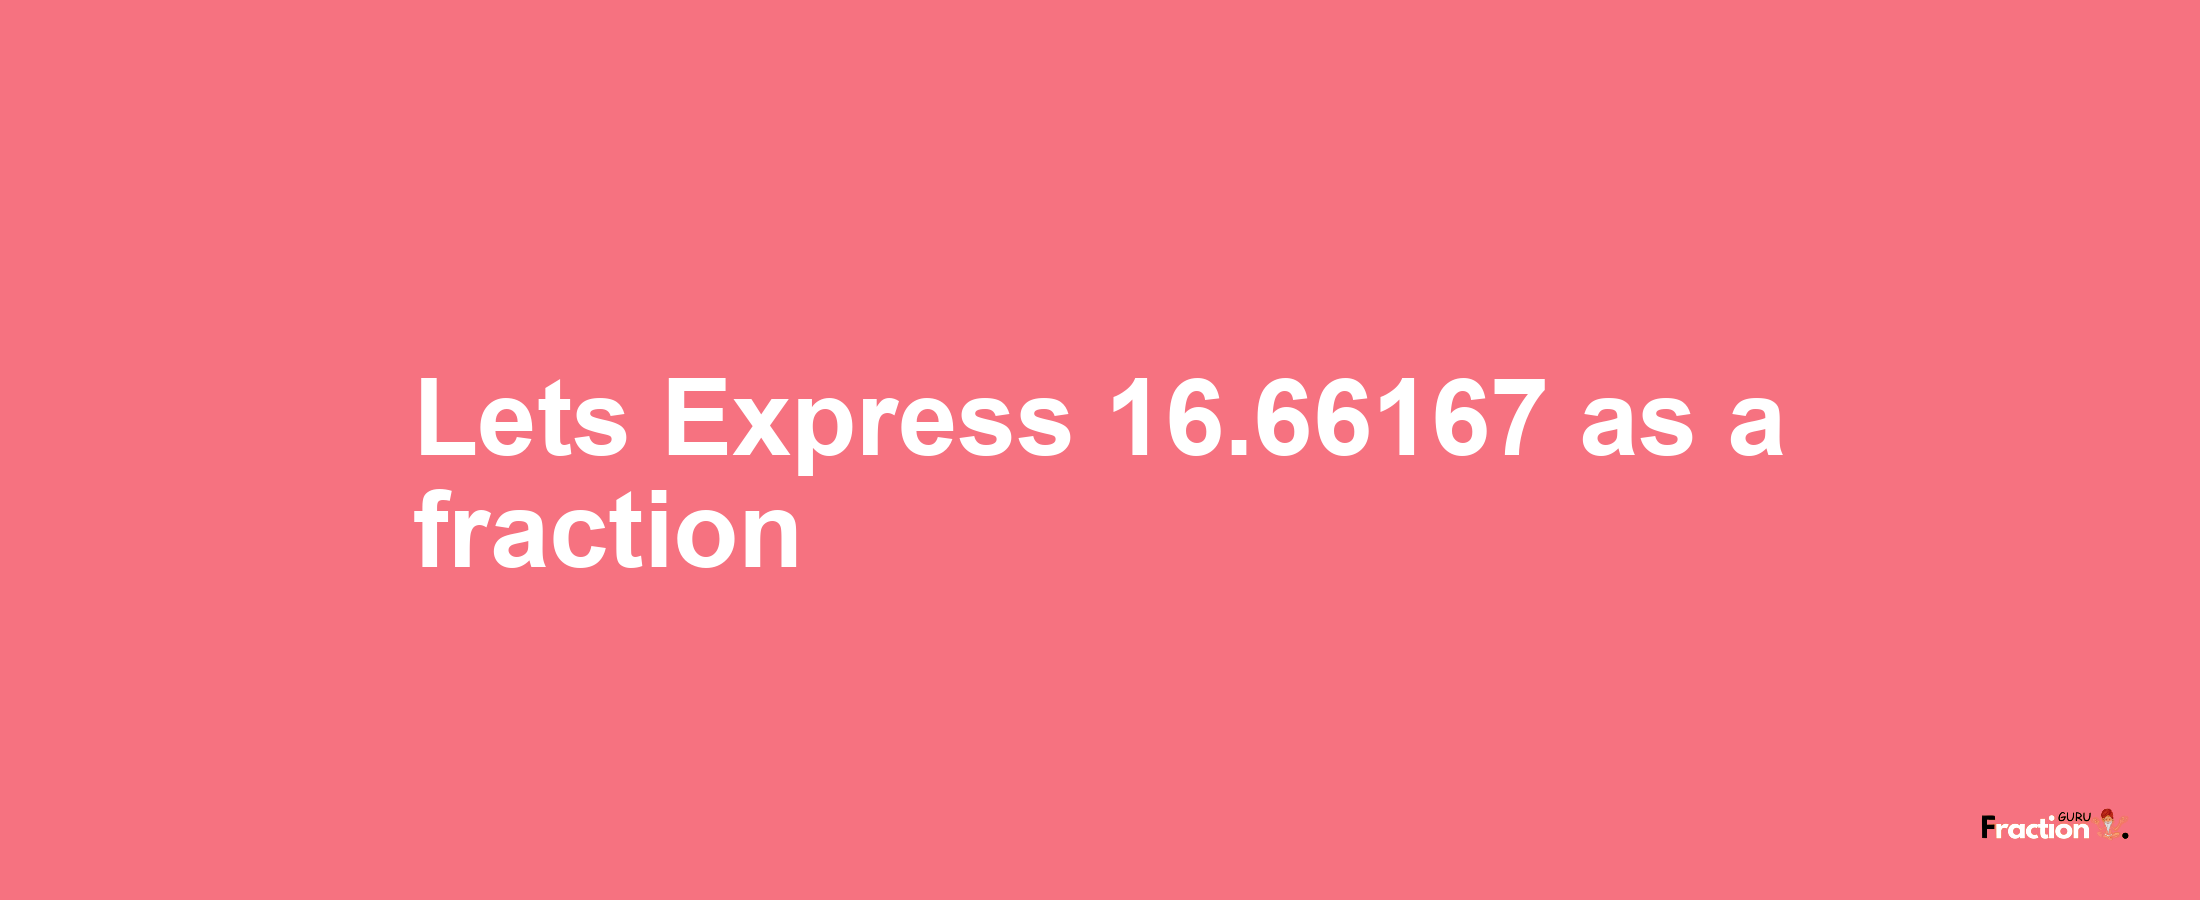 Lets Express 16.66167 as afraction